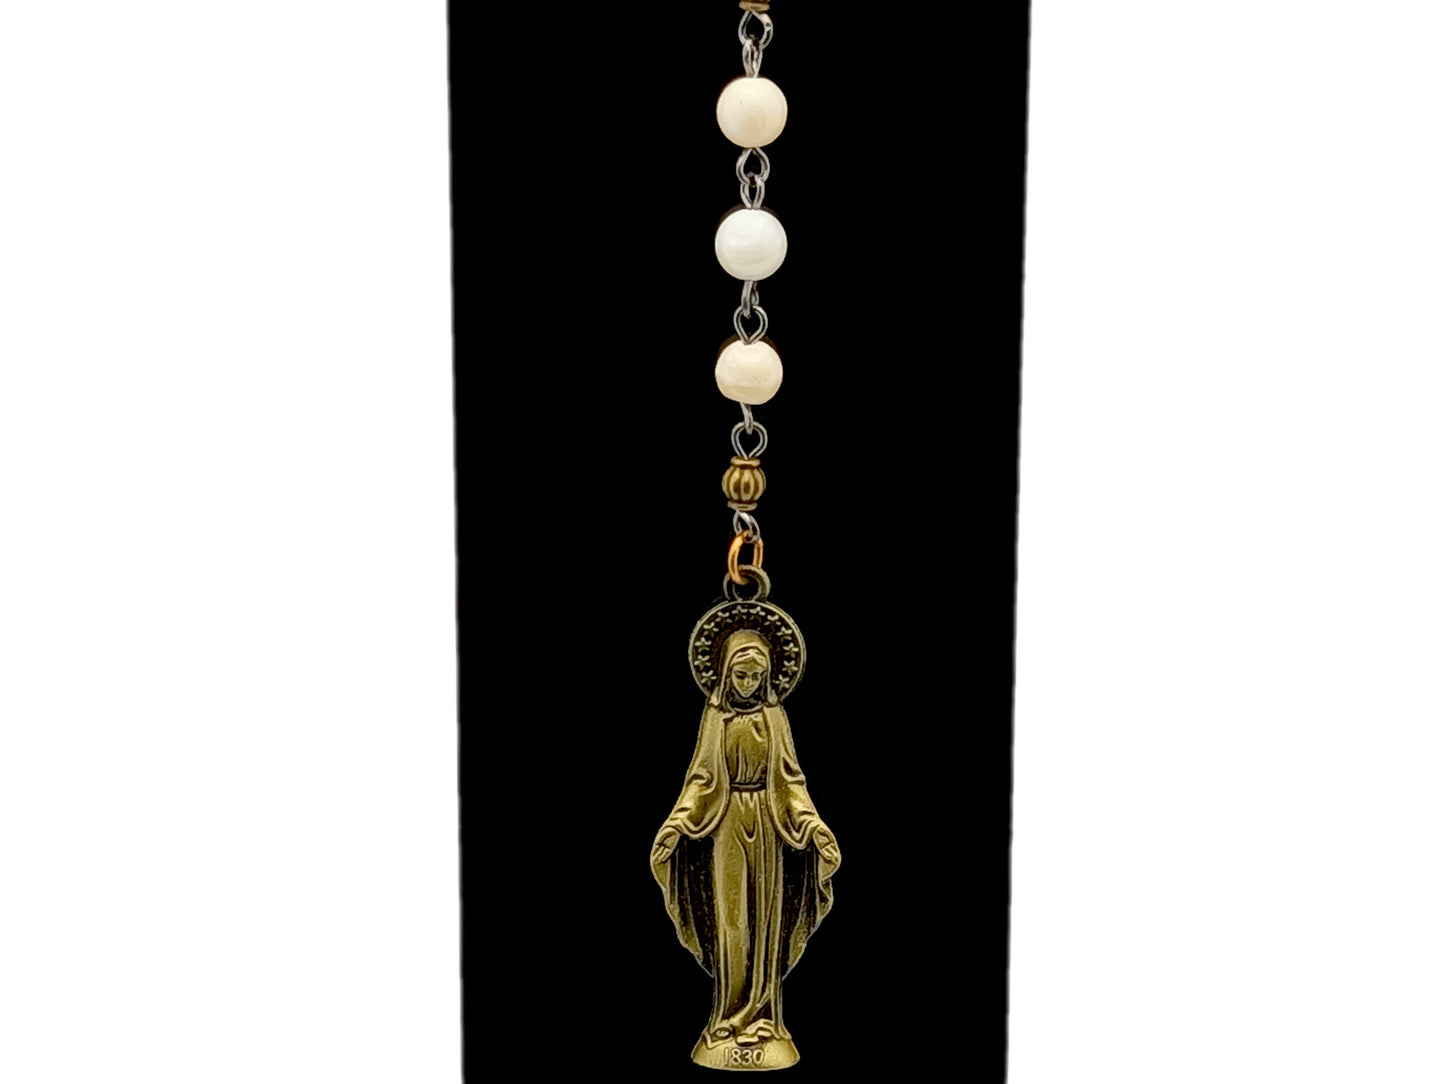 Our Lady of Grace unique rosary beads vintage brass purse clip key chain with mother of pearl Three Hail Mary beads and cross.